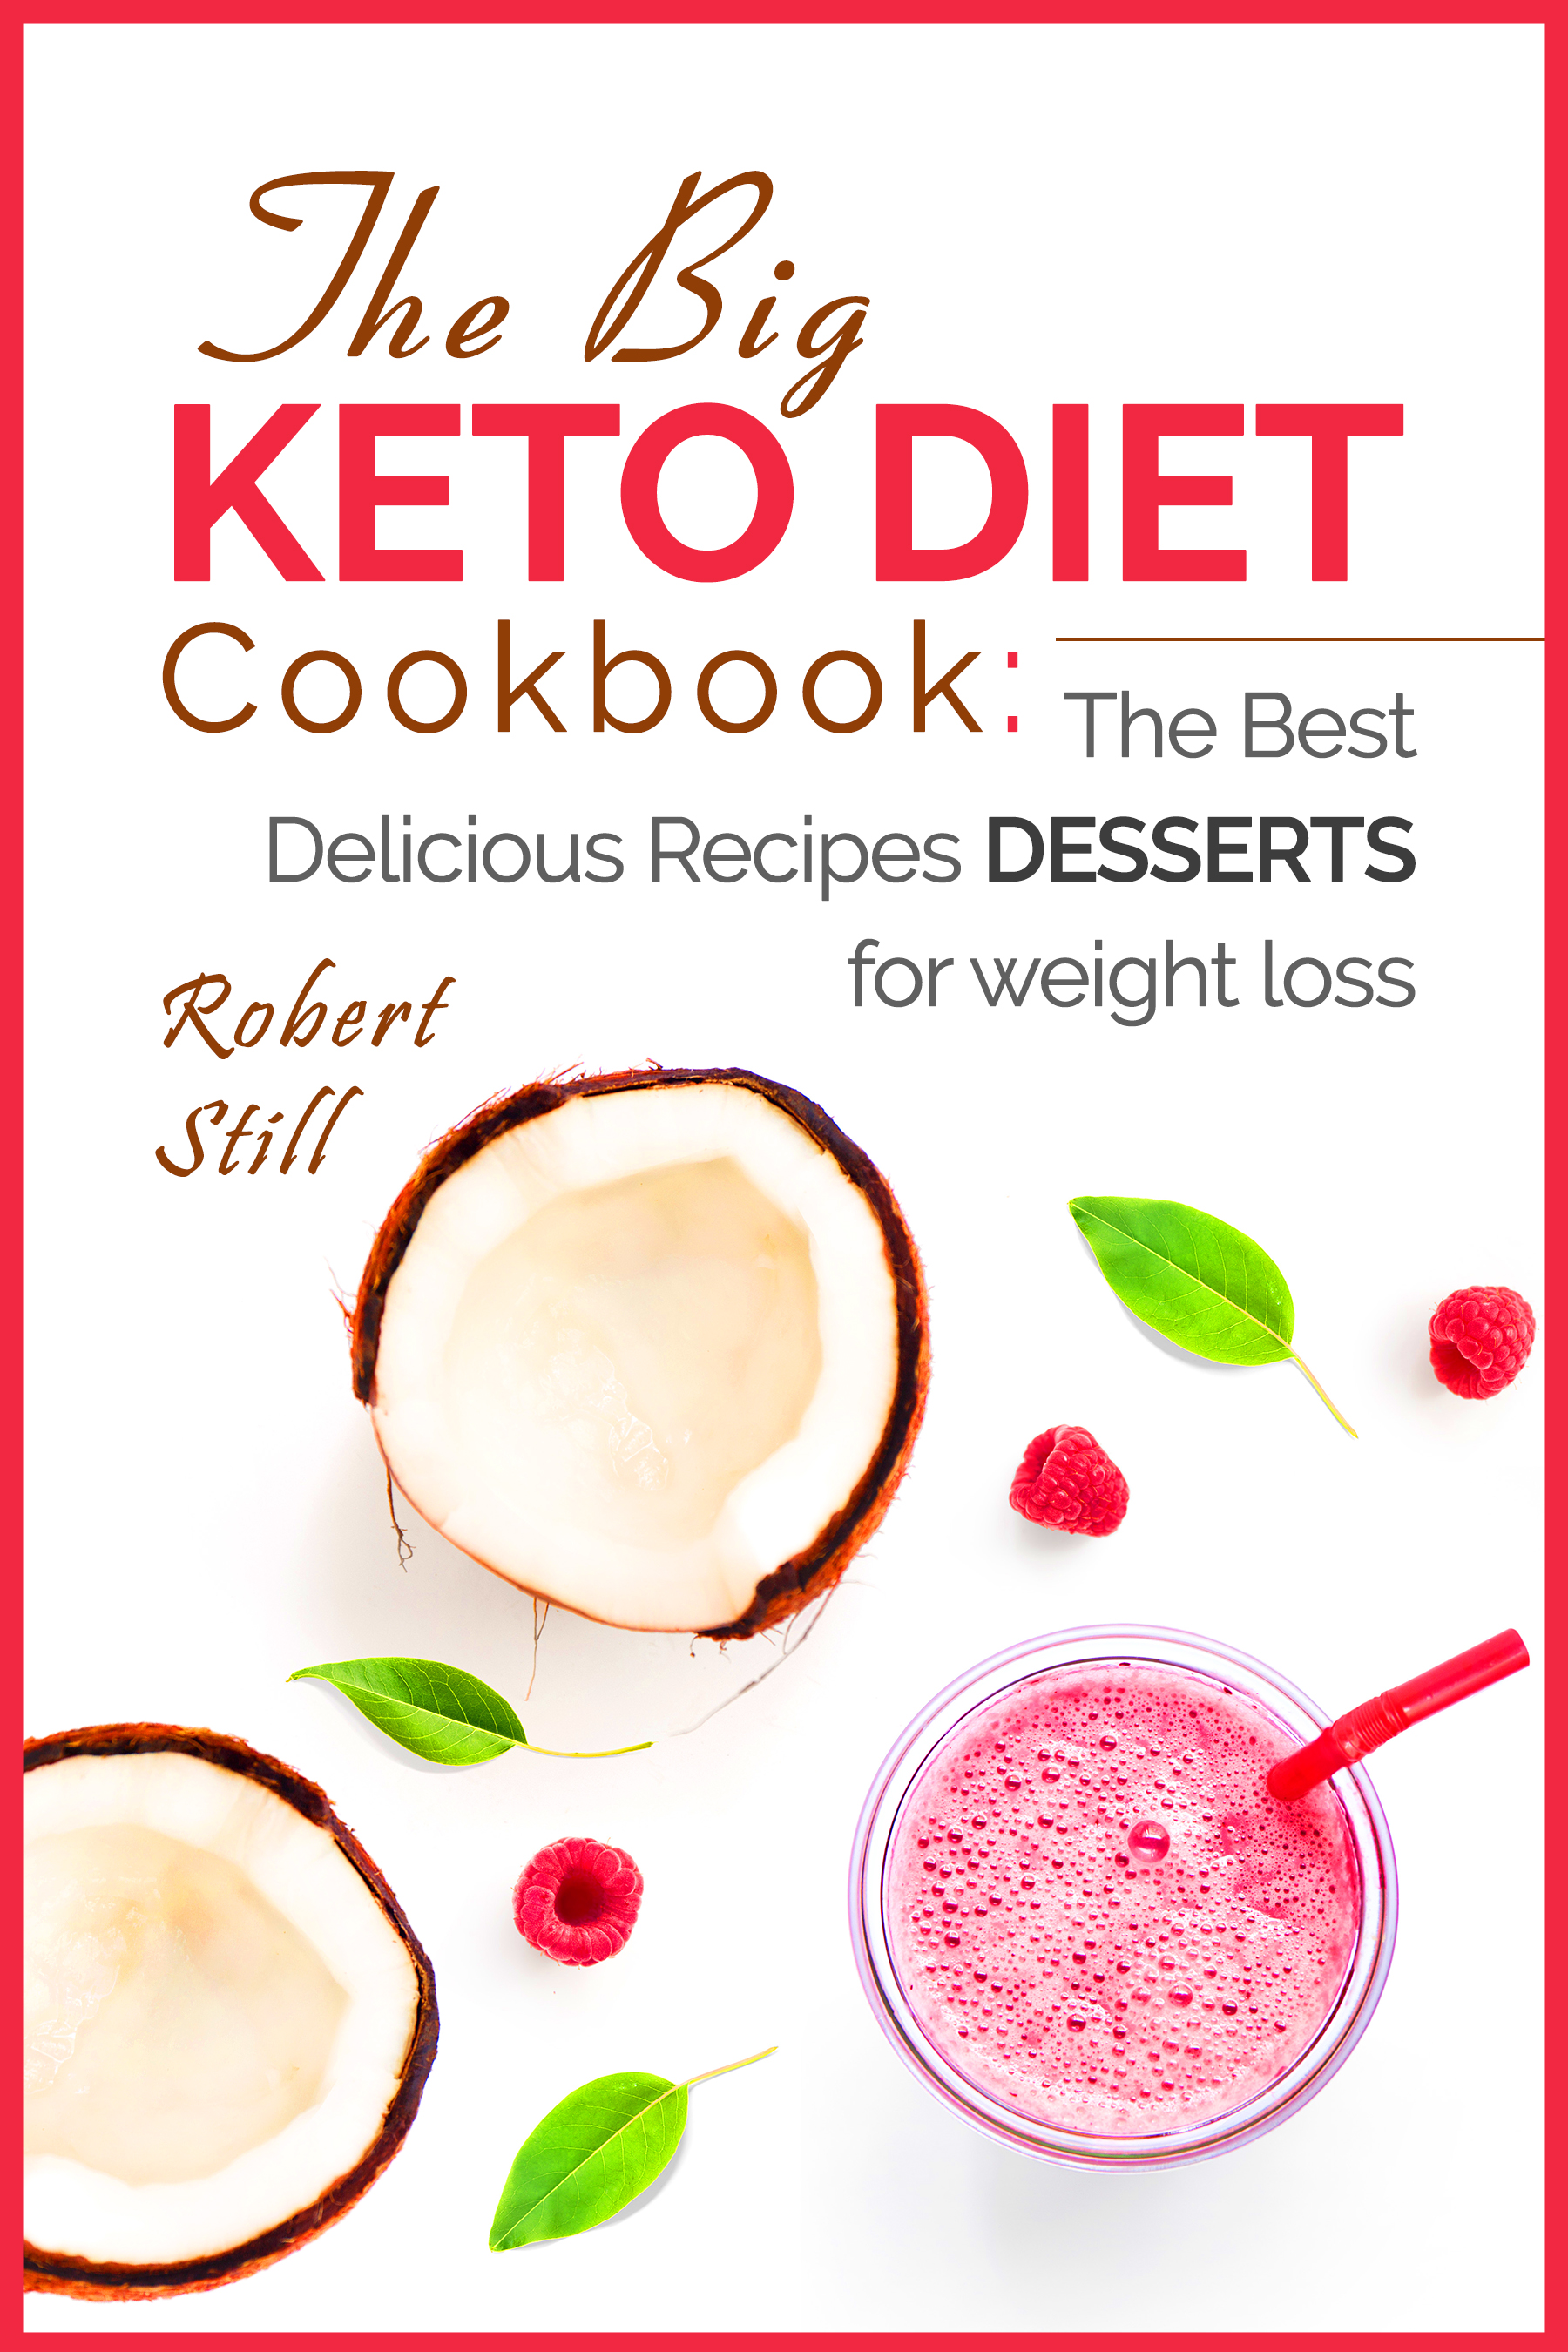 FREE: The Big Keto Diet Cookbook: the Best Delicious Recipes Desserts for weight loss by Robert Still